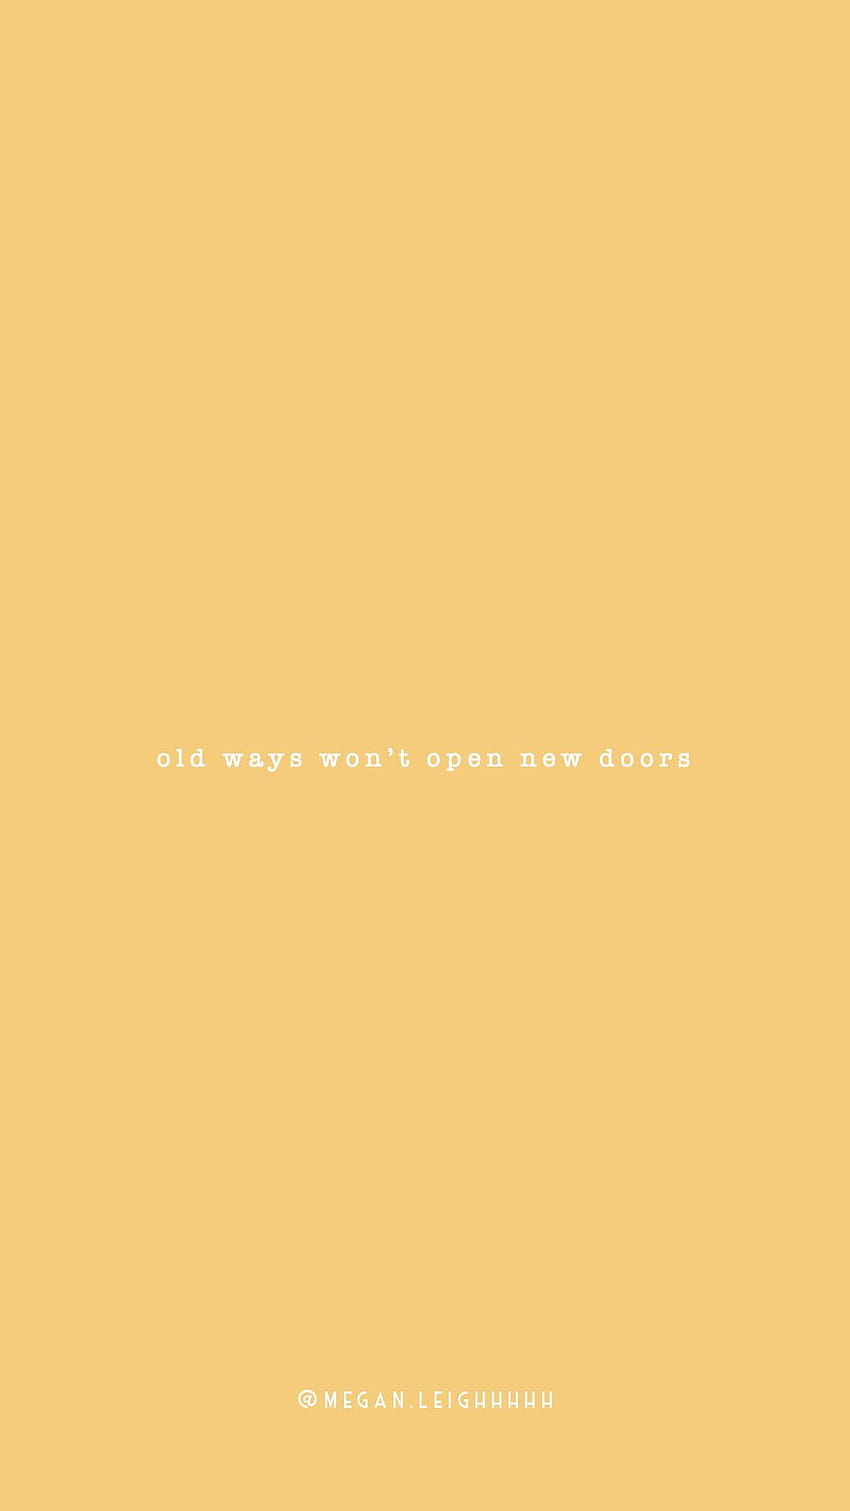 Mustard Yellow background Instagram story quote. Aesthetic HD phone wallpaper